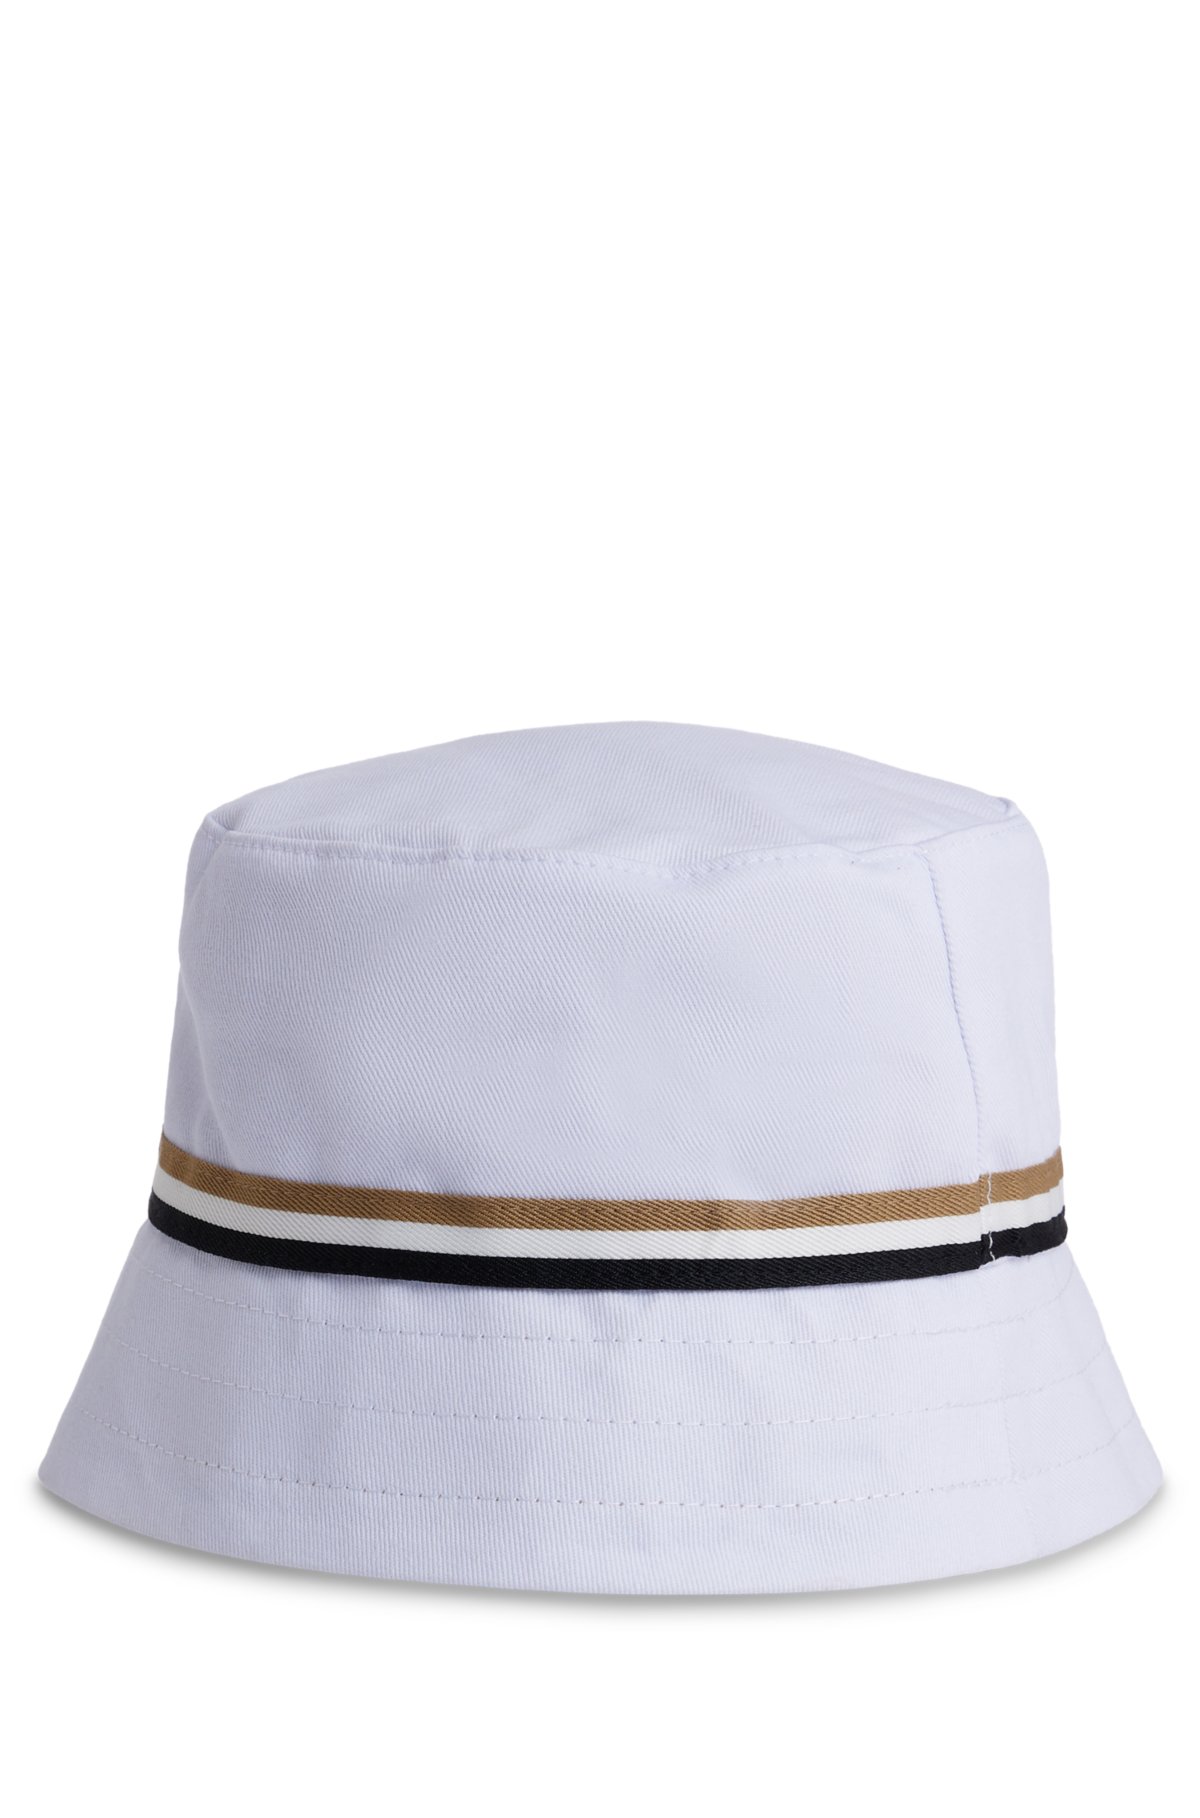 Baby bucket hat in reversible cotton twill, White